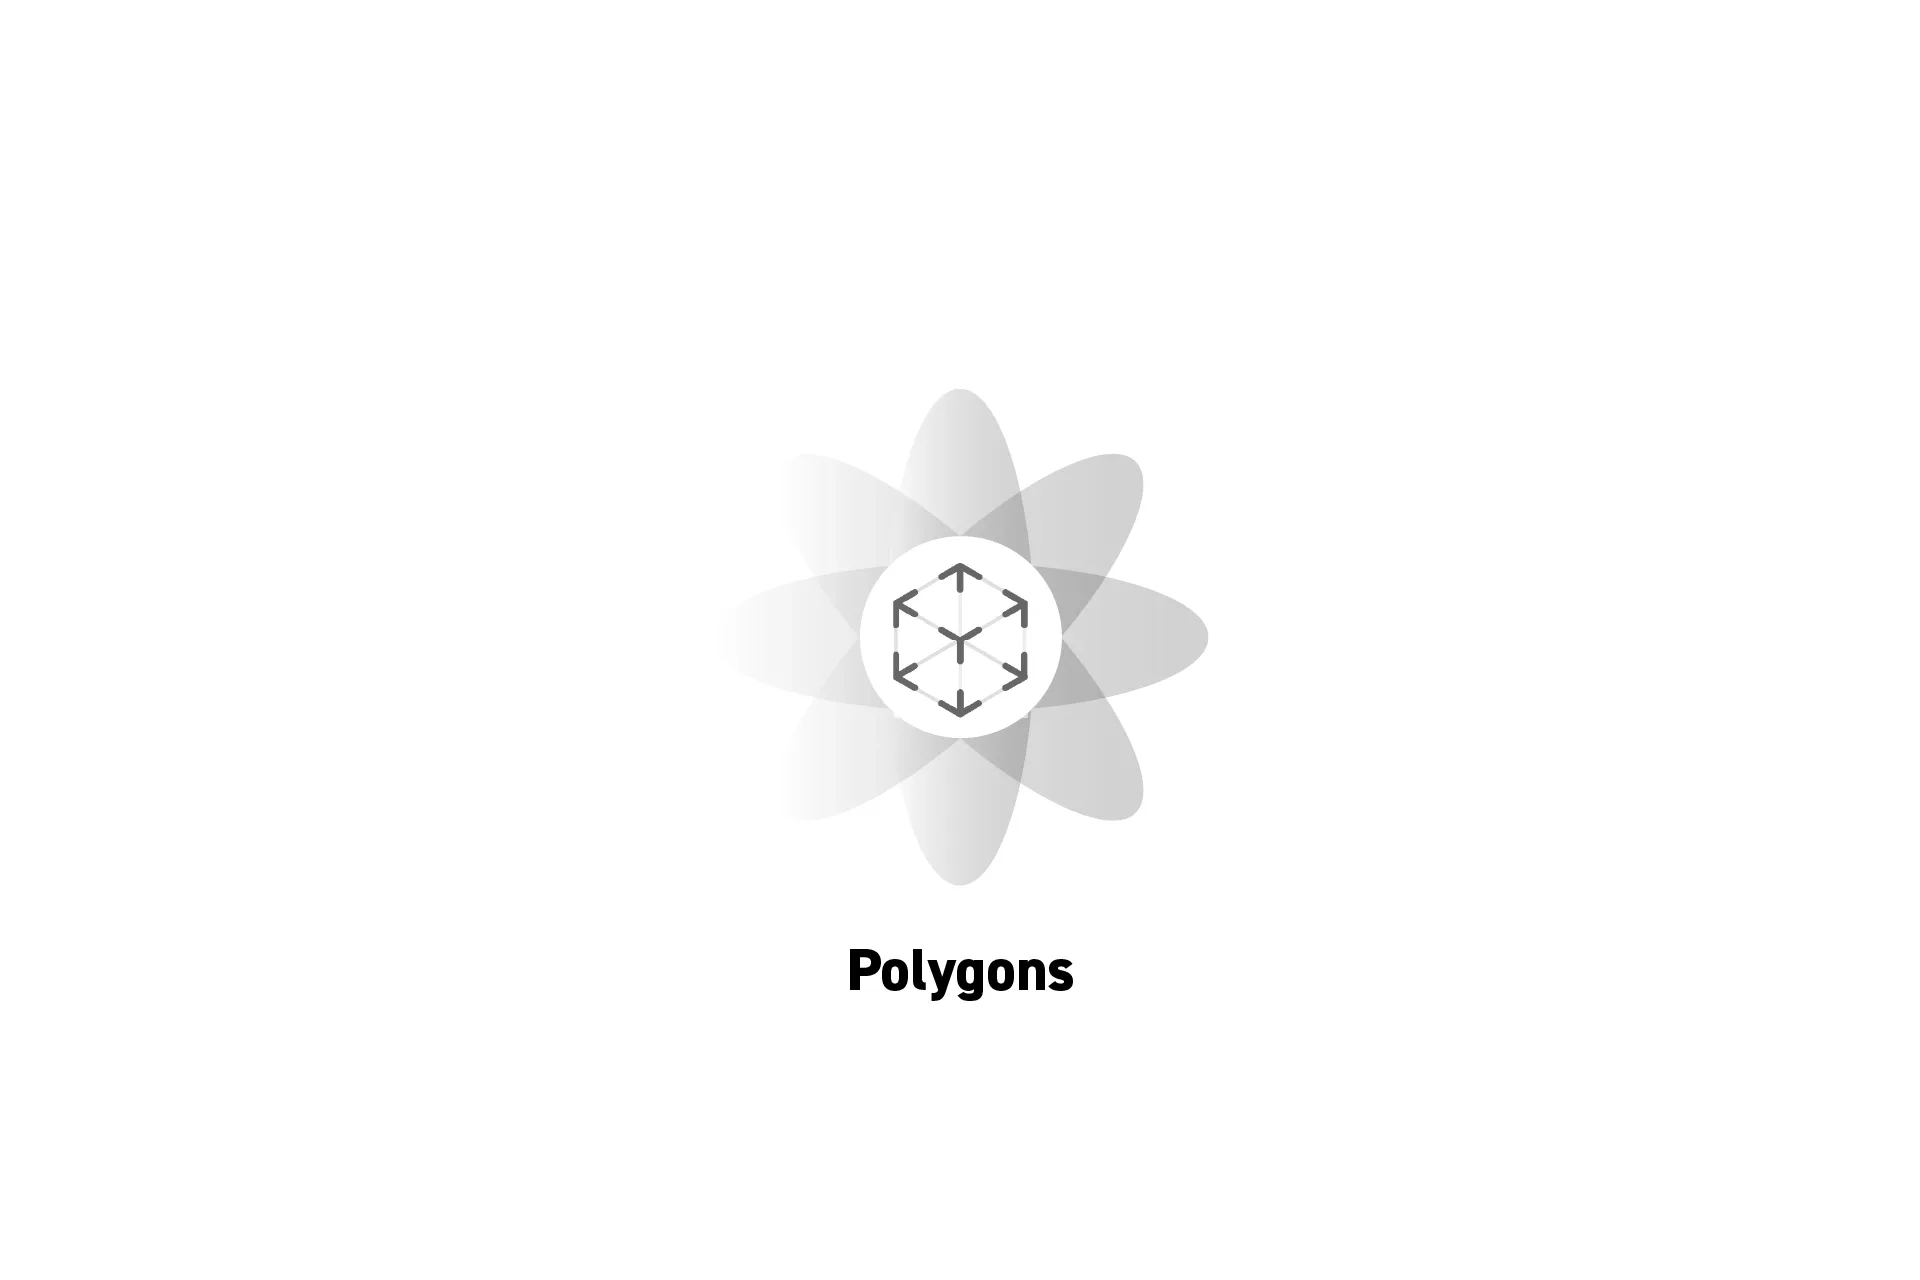 A flower that represents spatial computing with the text "Polygons" beneath it.